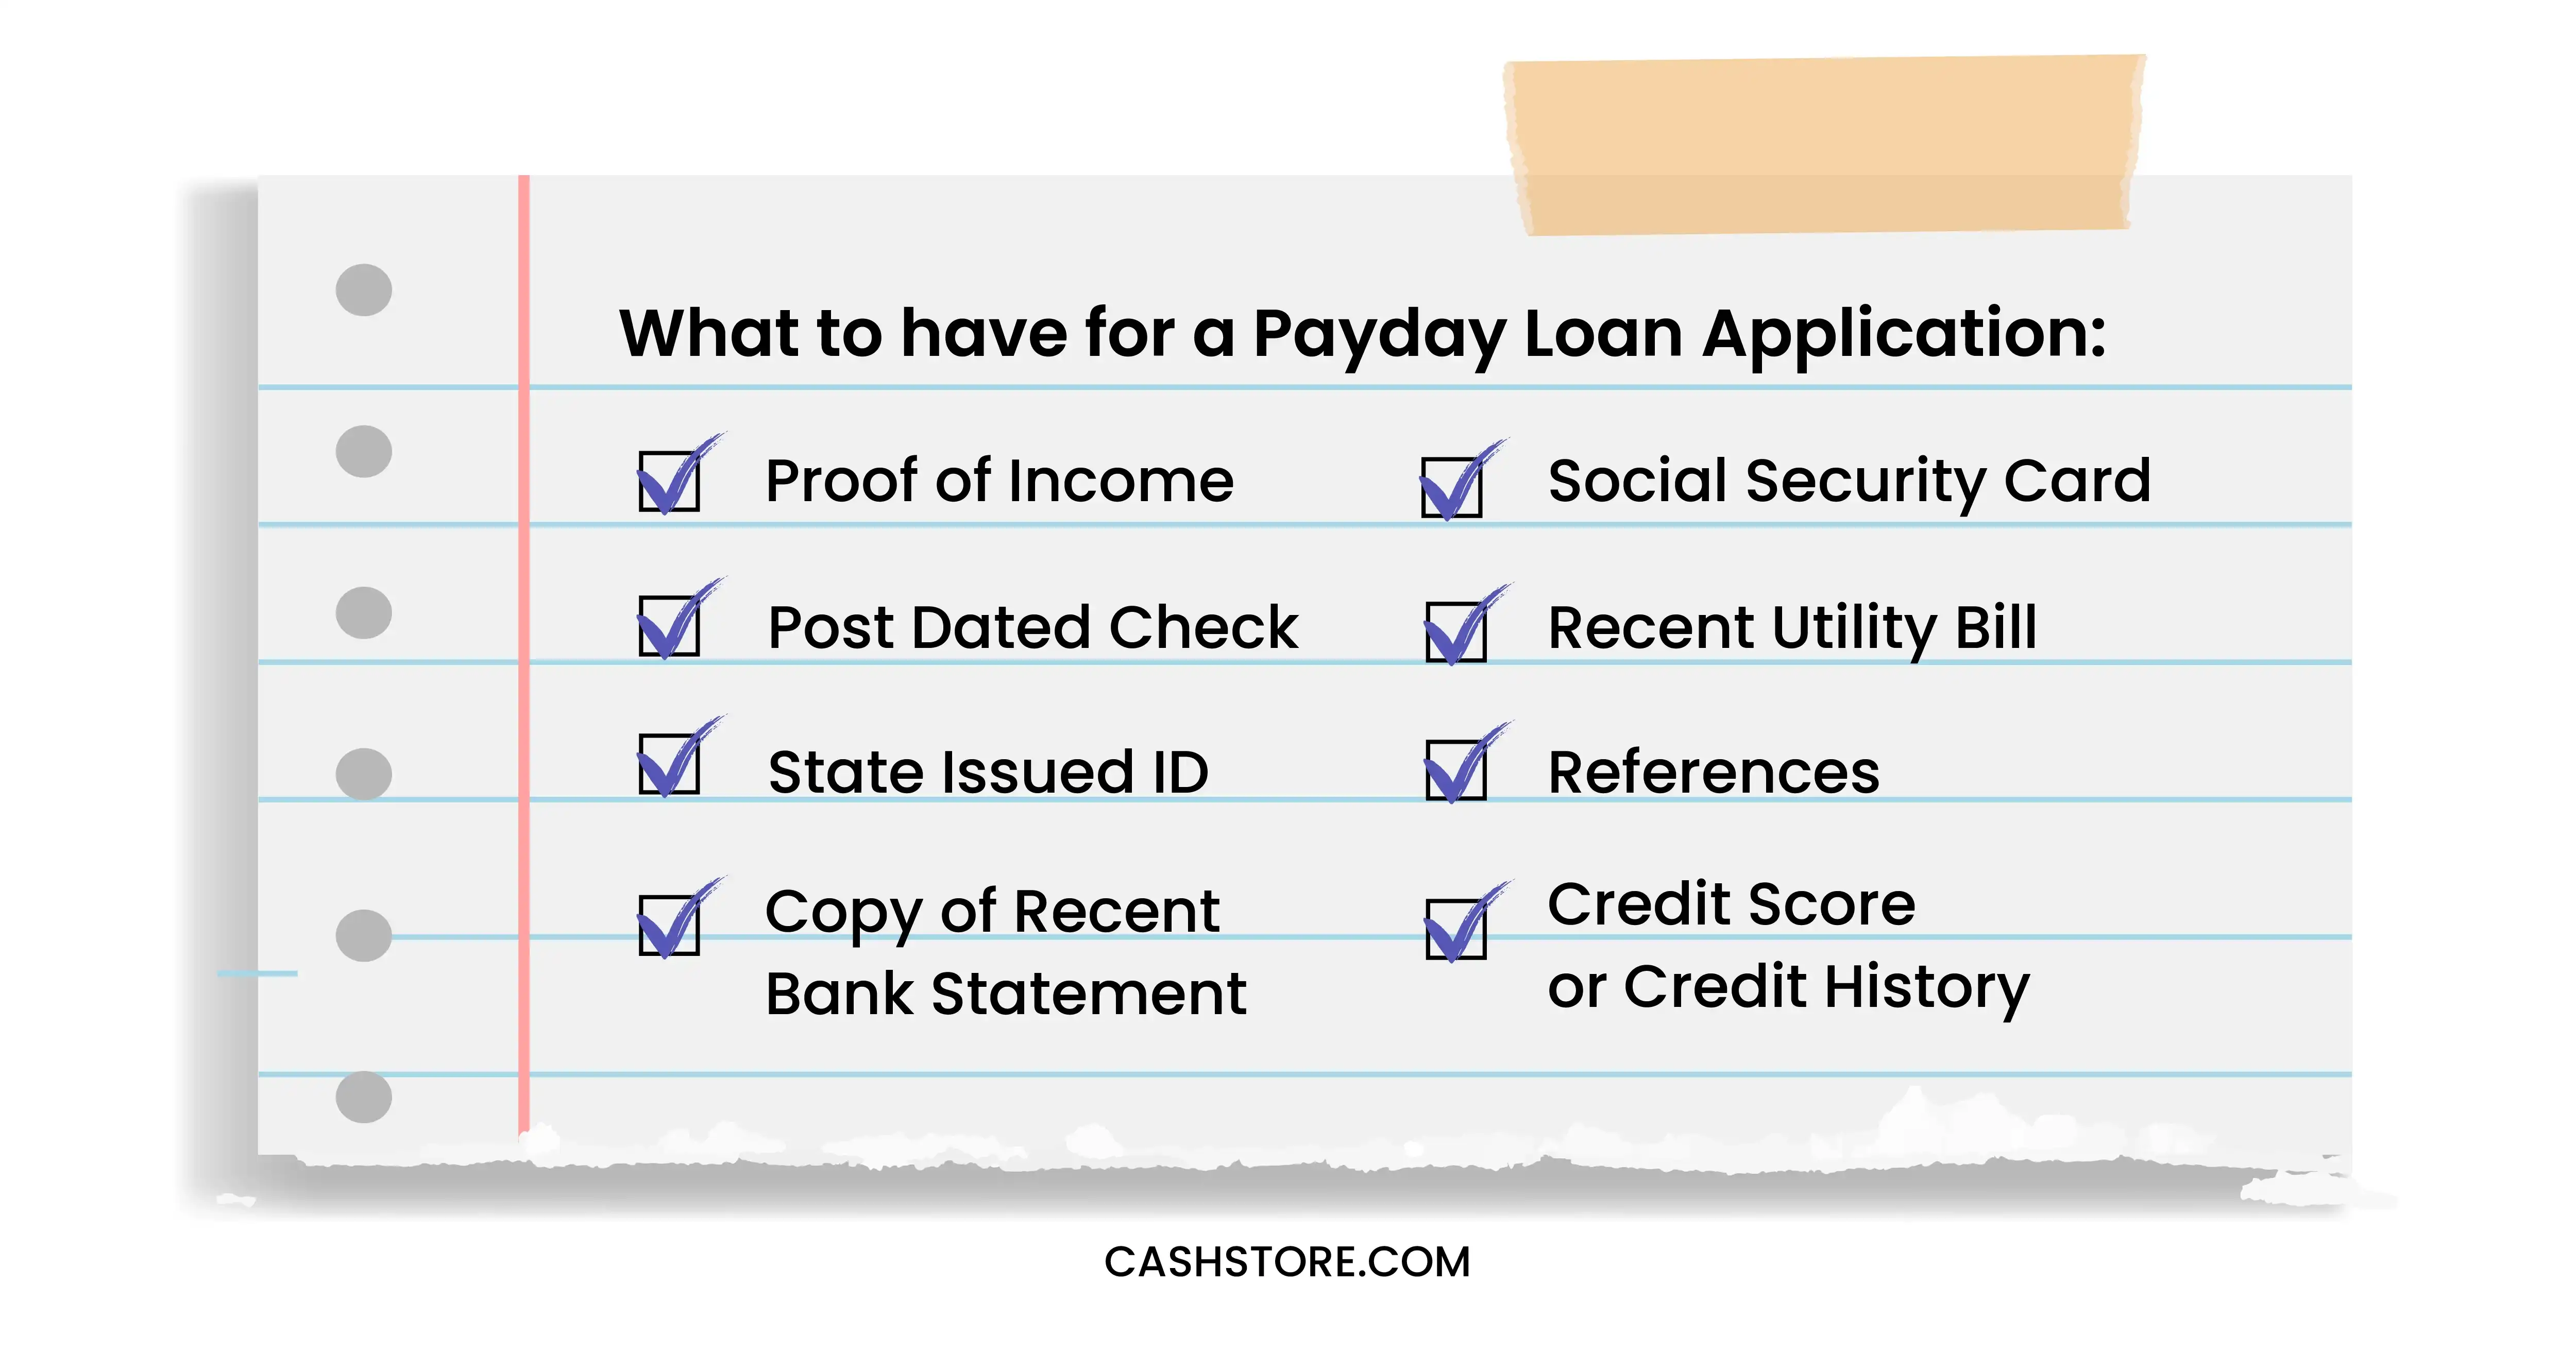 What to have for a Payday Loan Application